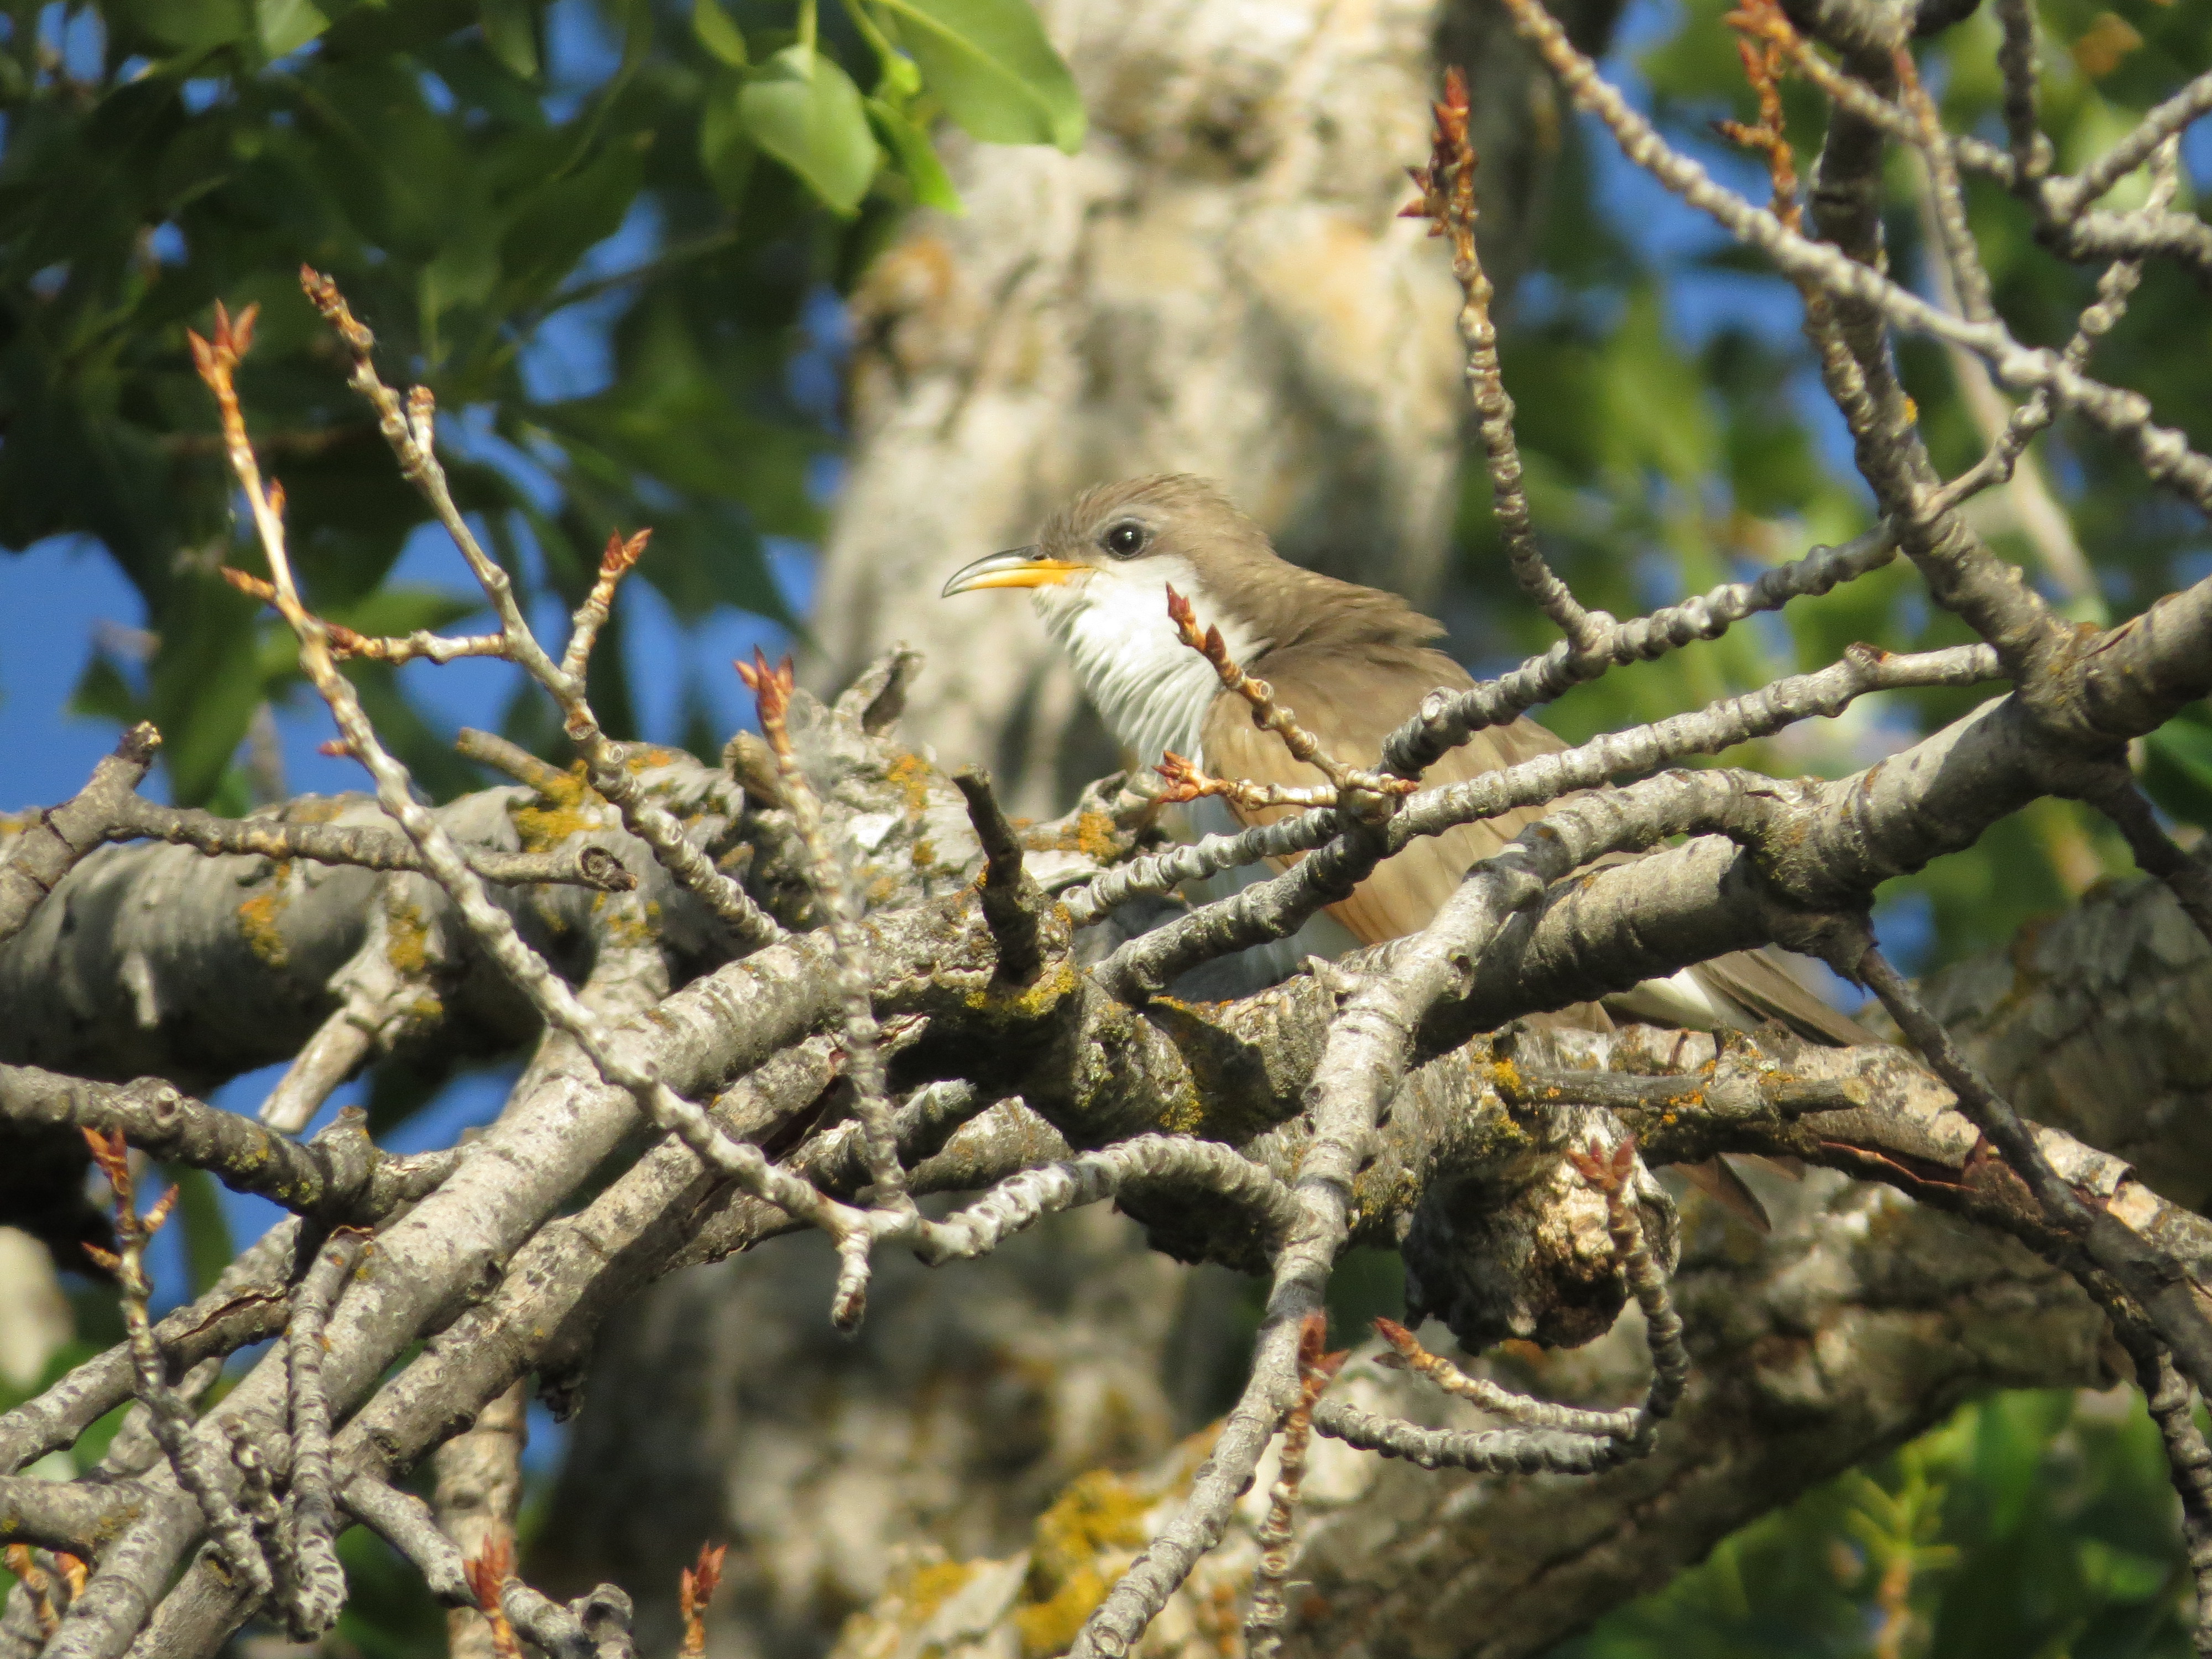 A yellow-billed cuckoo (a tan bird with yellow bill and white breast) crouches in branches as if looking for insects